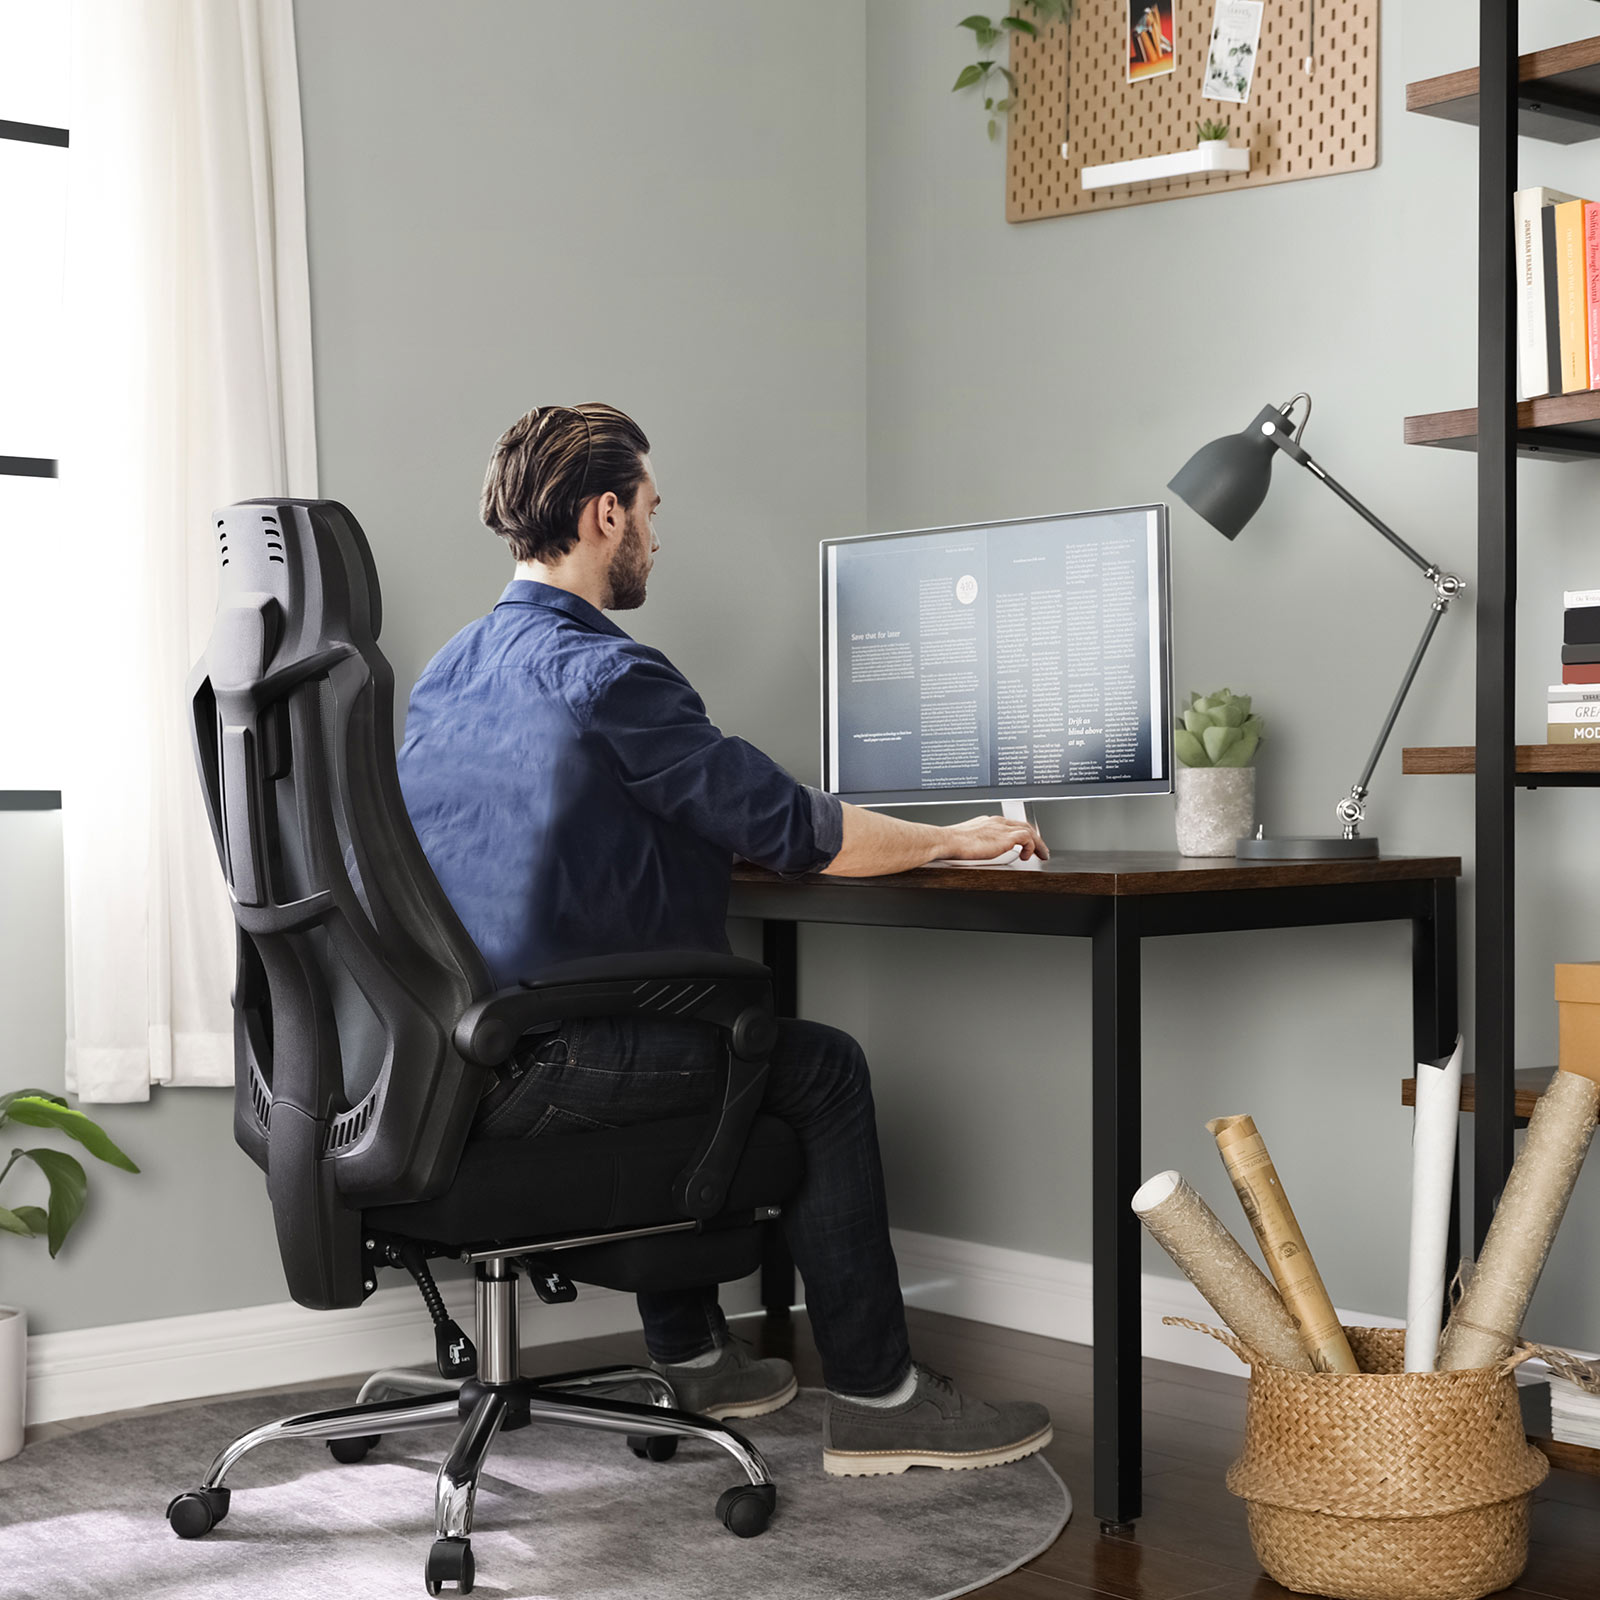 Black Adjustable Office Chair with Footrest | Home Office | SONGMICS